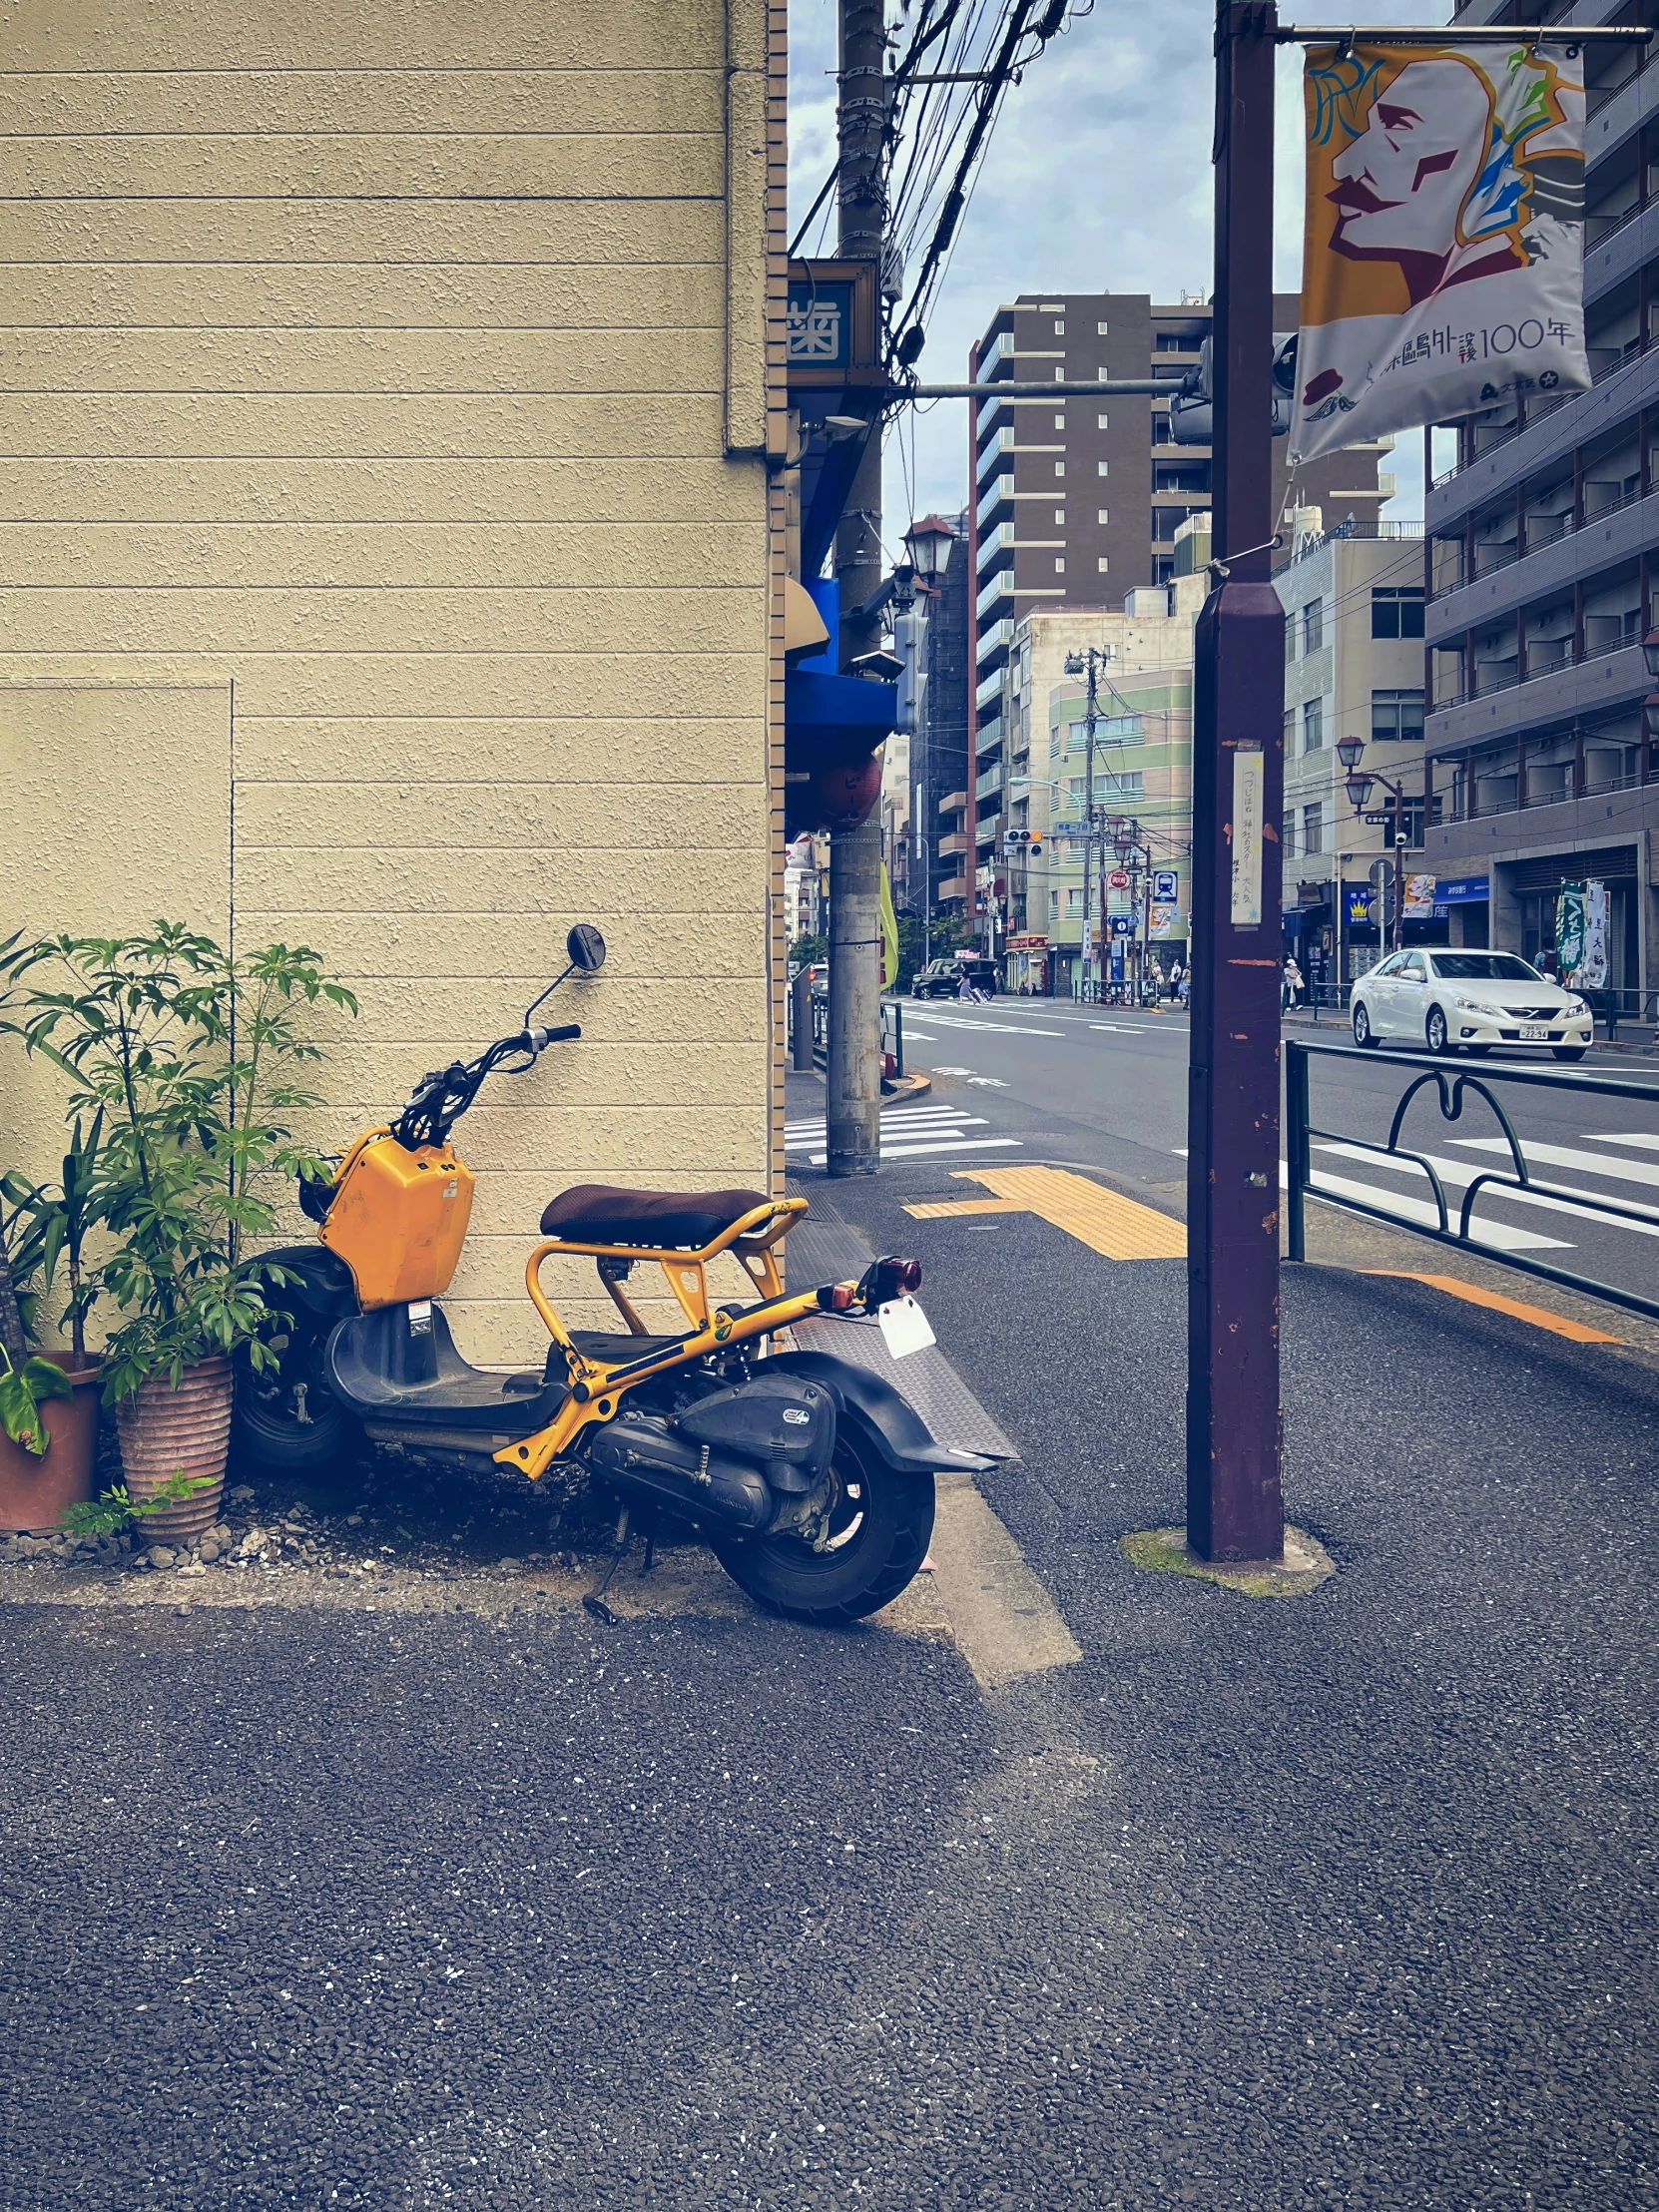 a motor bike parked in front of a wall